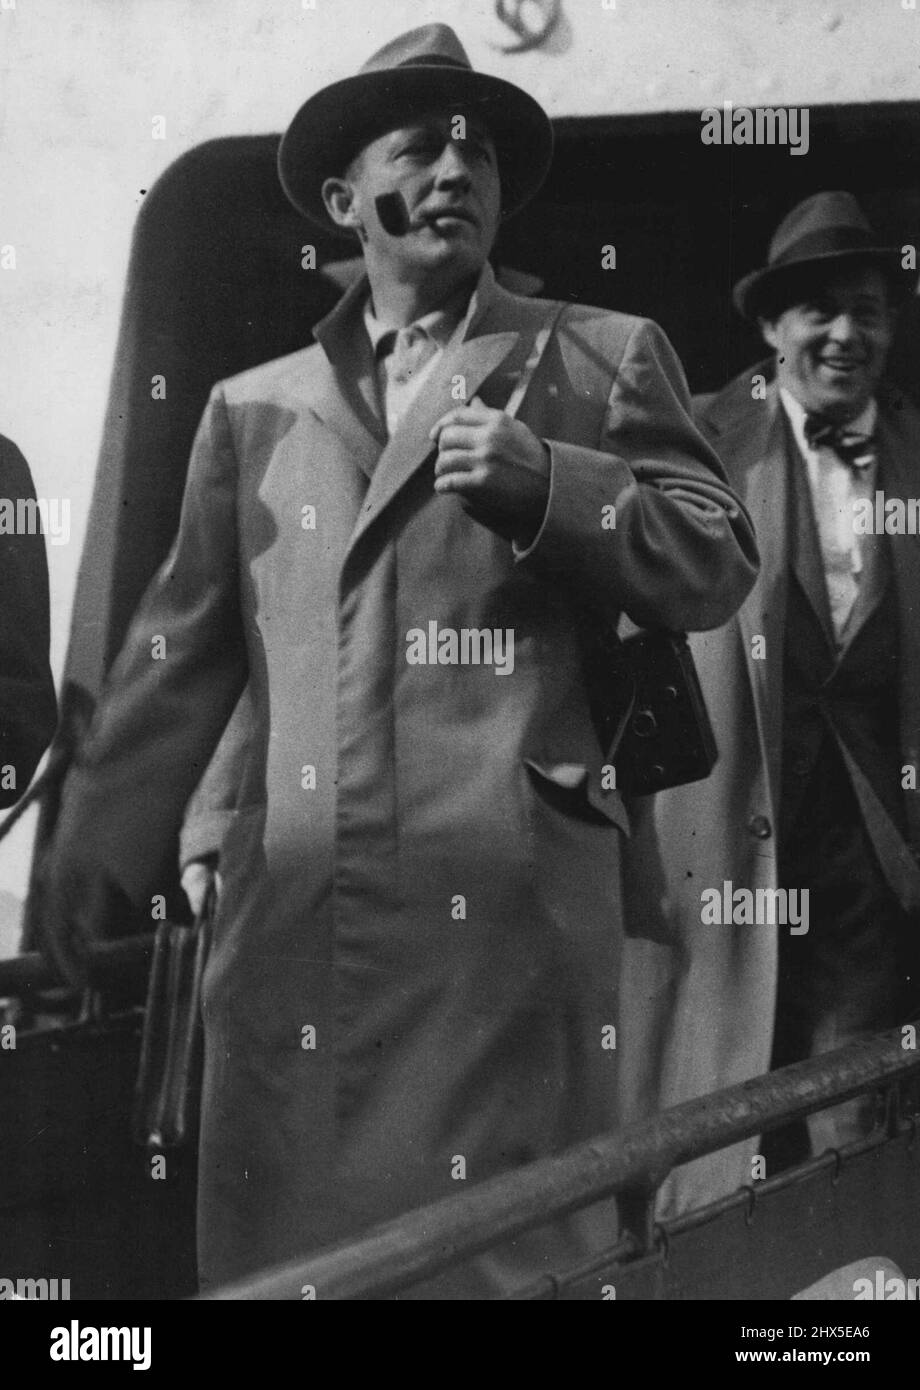 Crooner Crosby At Dover. Camera, Over his Shoulder Pipe in mouth, and a grin on his face, Bing Crosby arrives at Dover from the continent on his way to St. Andrews, Scotland,for the British Amateur Golf Championships Which open there tomorrow (Monday). On his arrival he was driven away in a car to a 'Secret' destination... Thousands of his 'Fans' who waited both at Dover and at London to See the Crooner were Unlucky. May 21, 1950. (Photo by Pictorial Department) Stock Photo